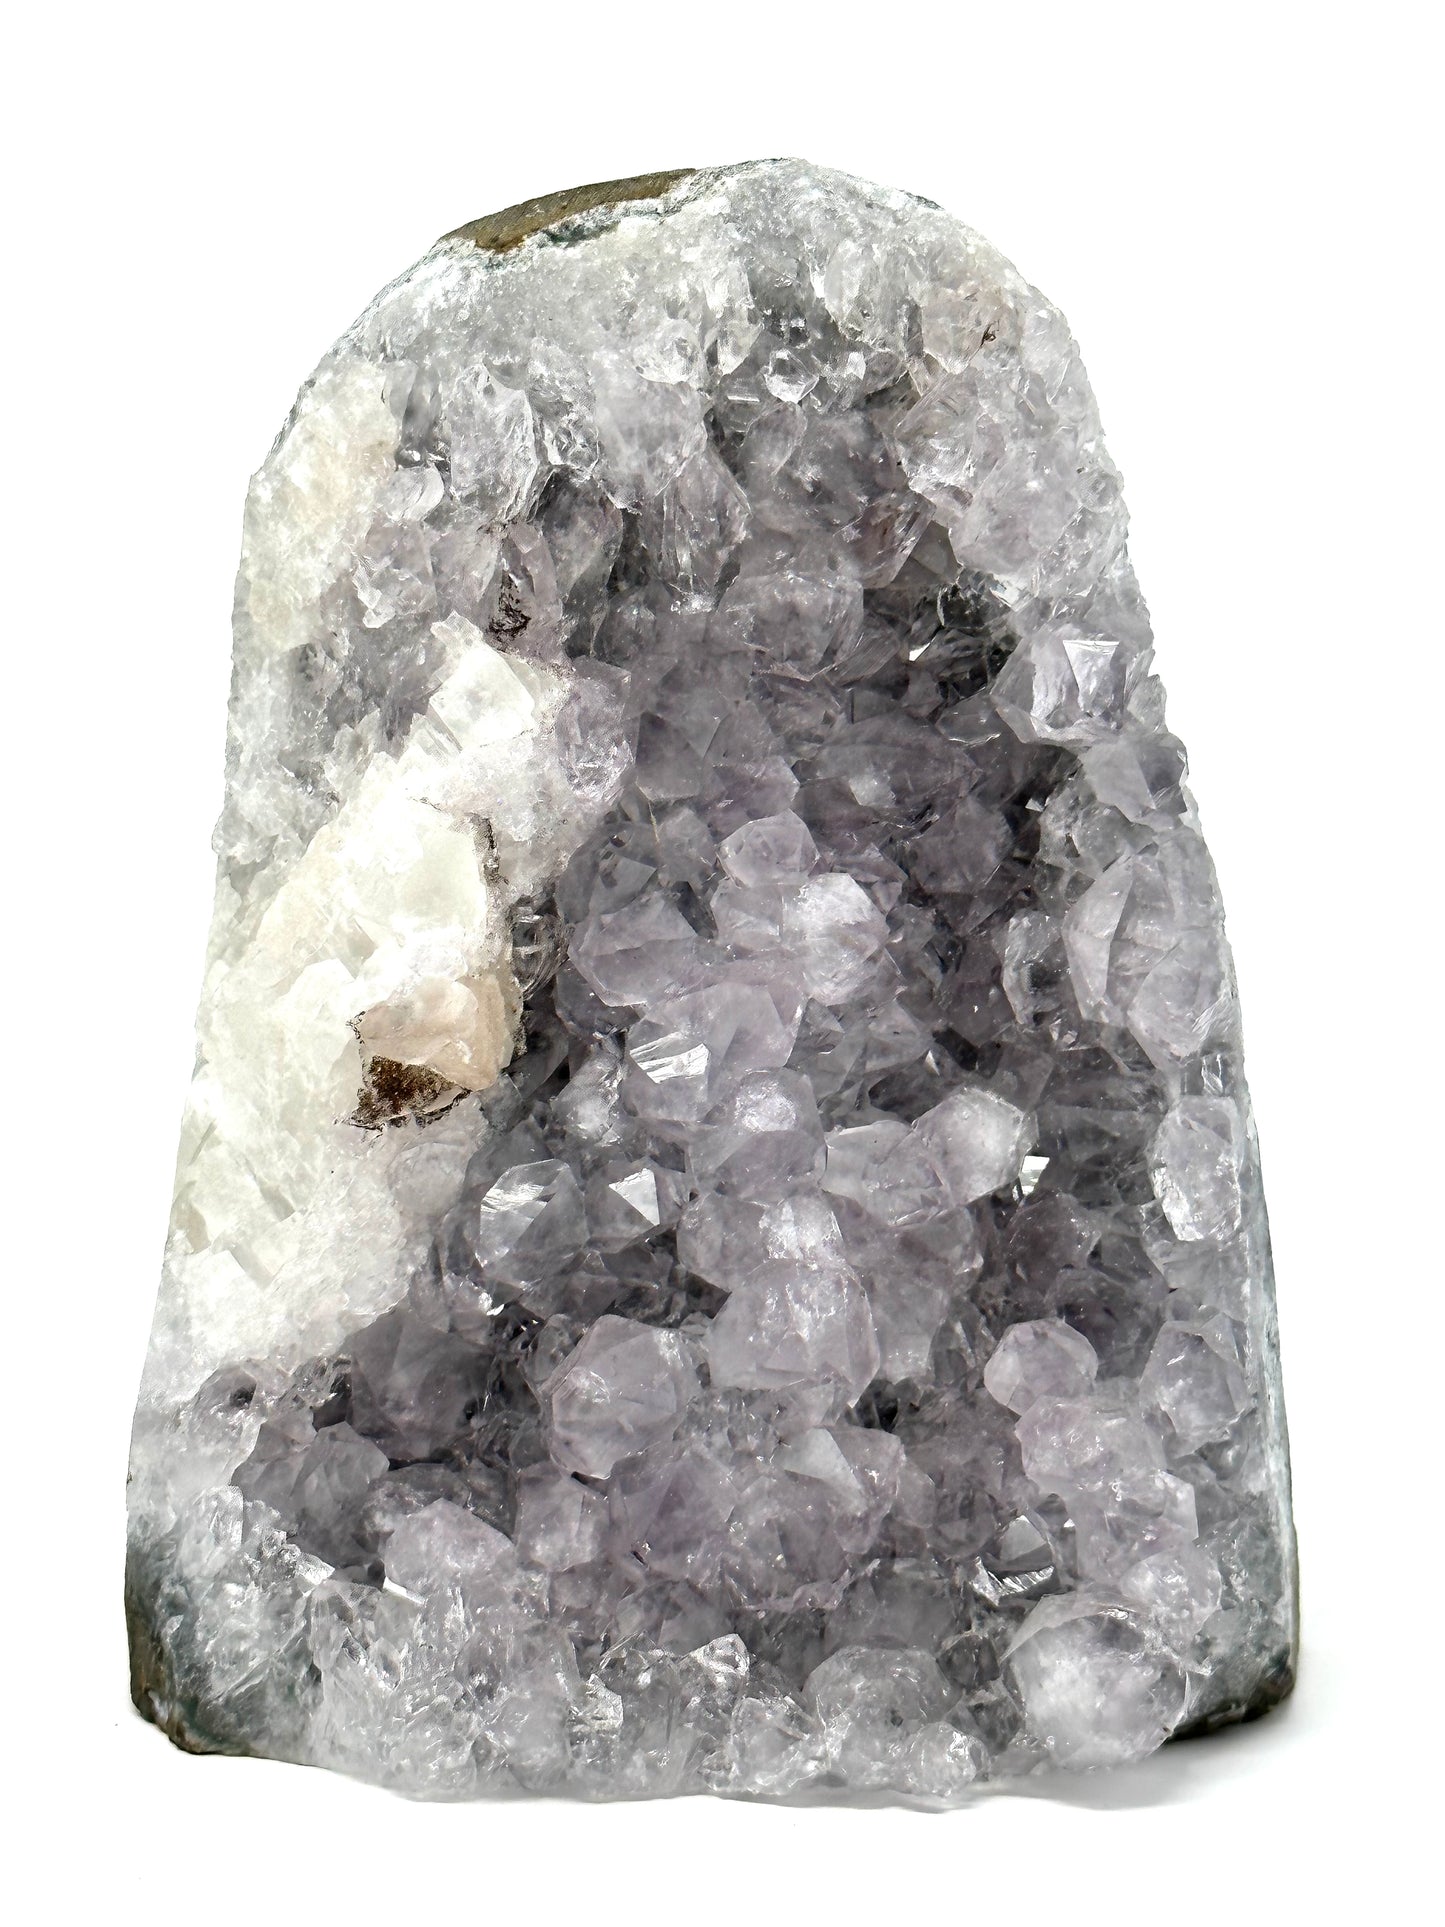 Nebula Amethyst featuring Gemmy Calcite and Marcasite Druse